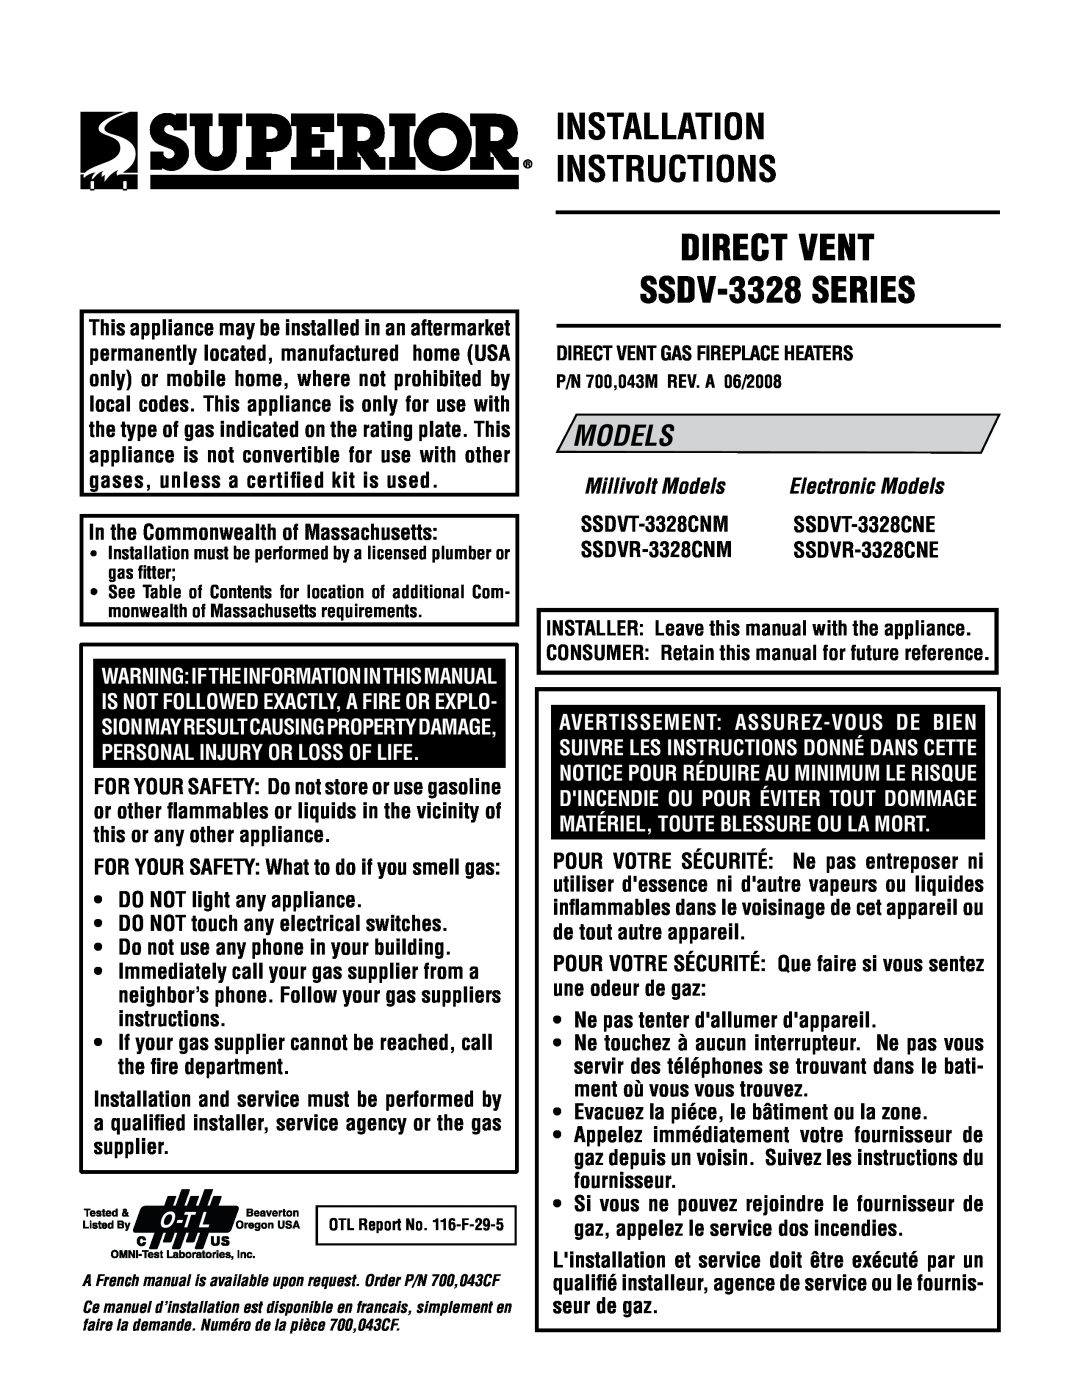 TOA Electronics installation instructions INSTALLATION INSTRUCTIONS DIRECT VENT SSDV-3328 SERIES, Models 